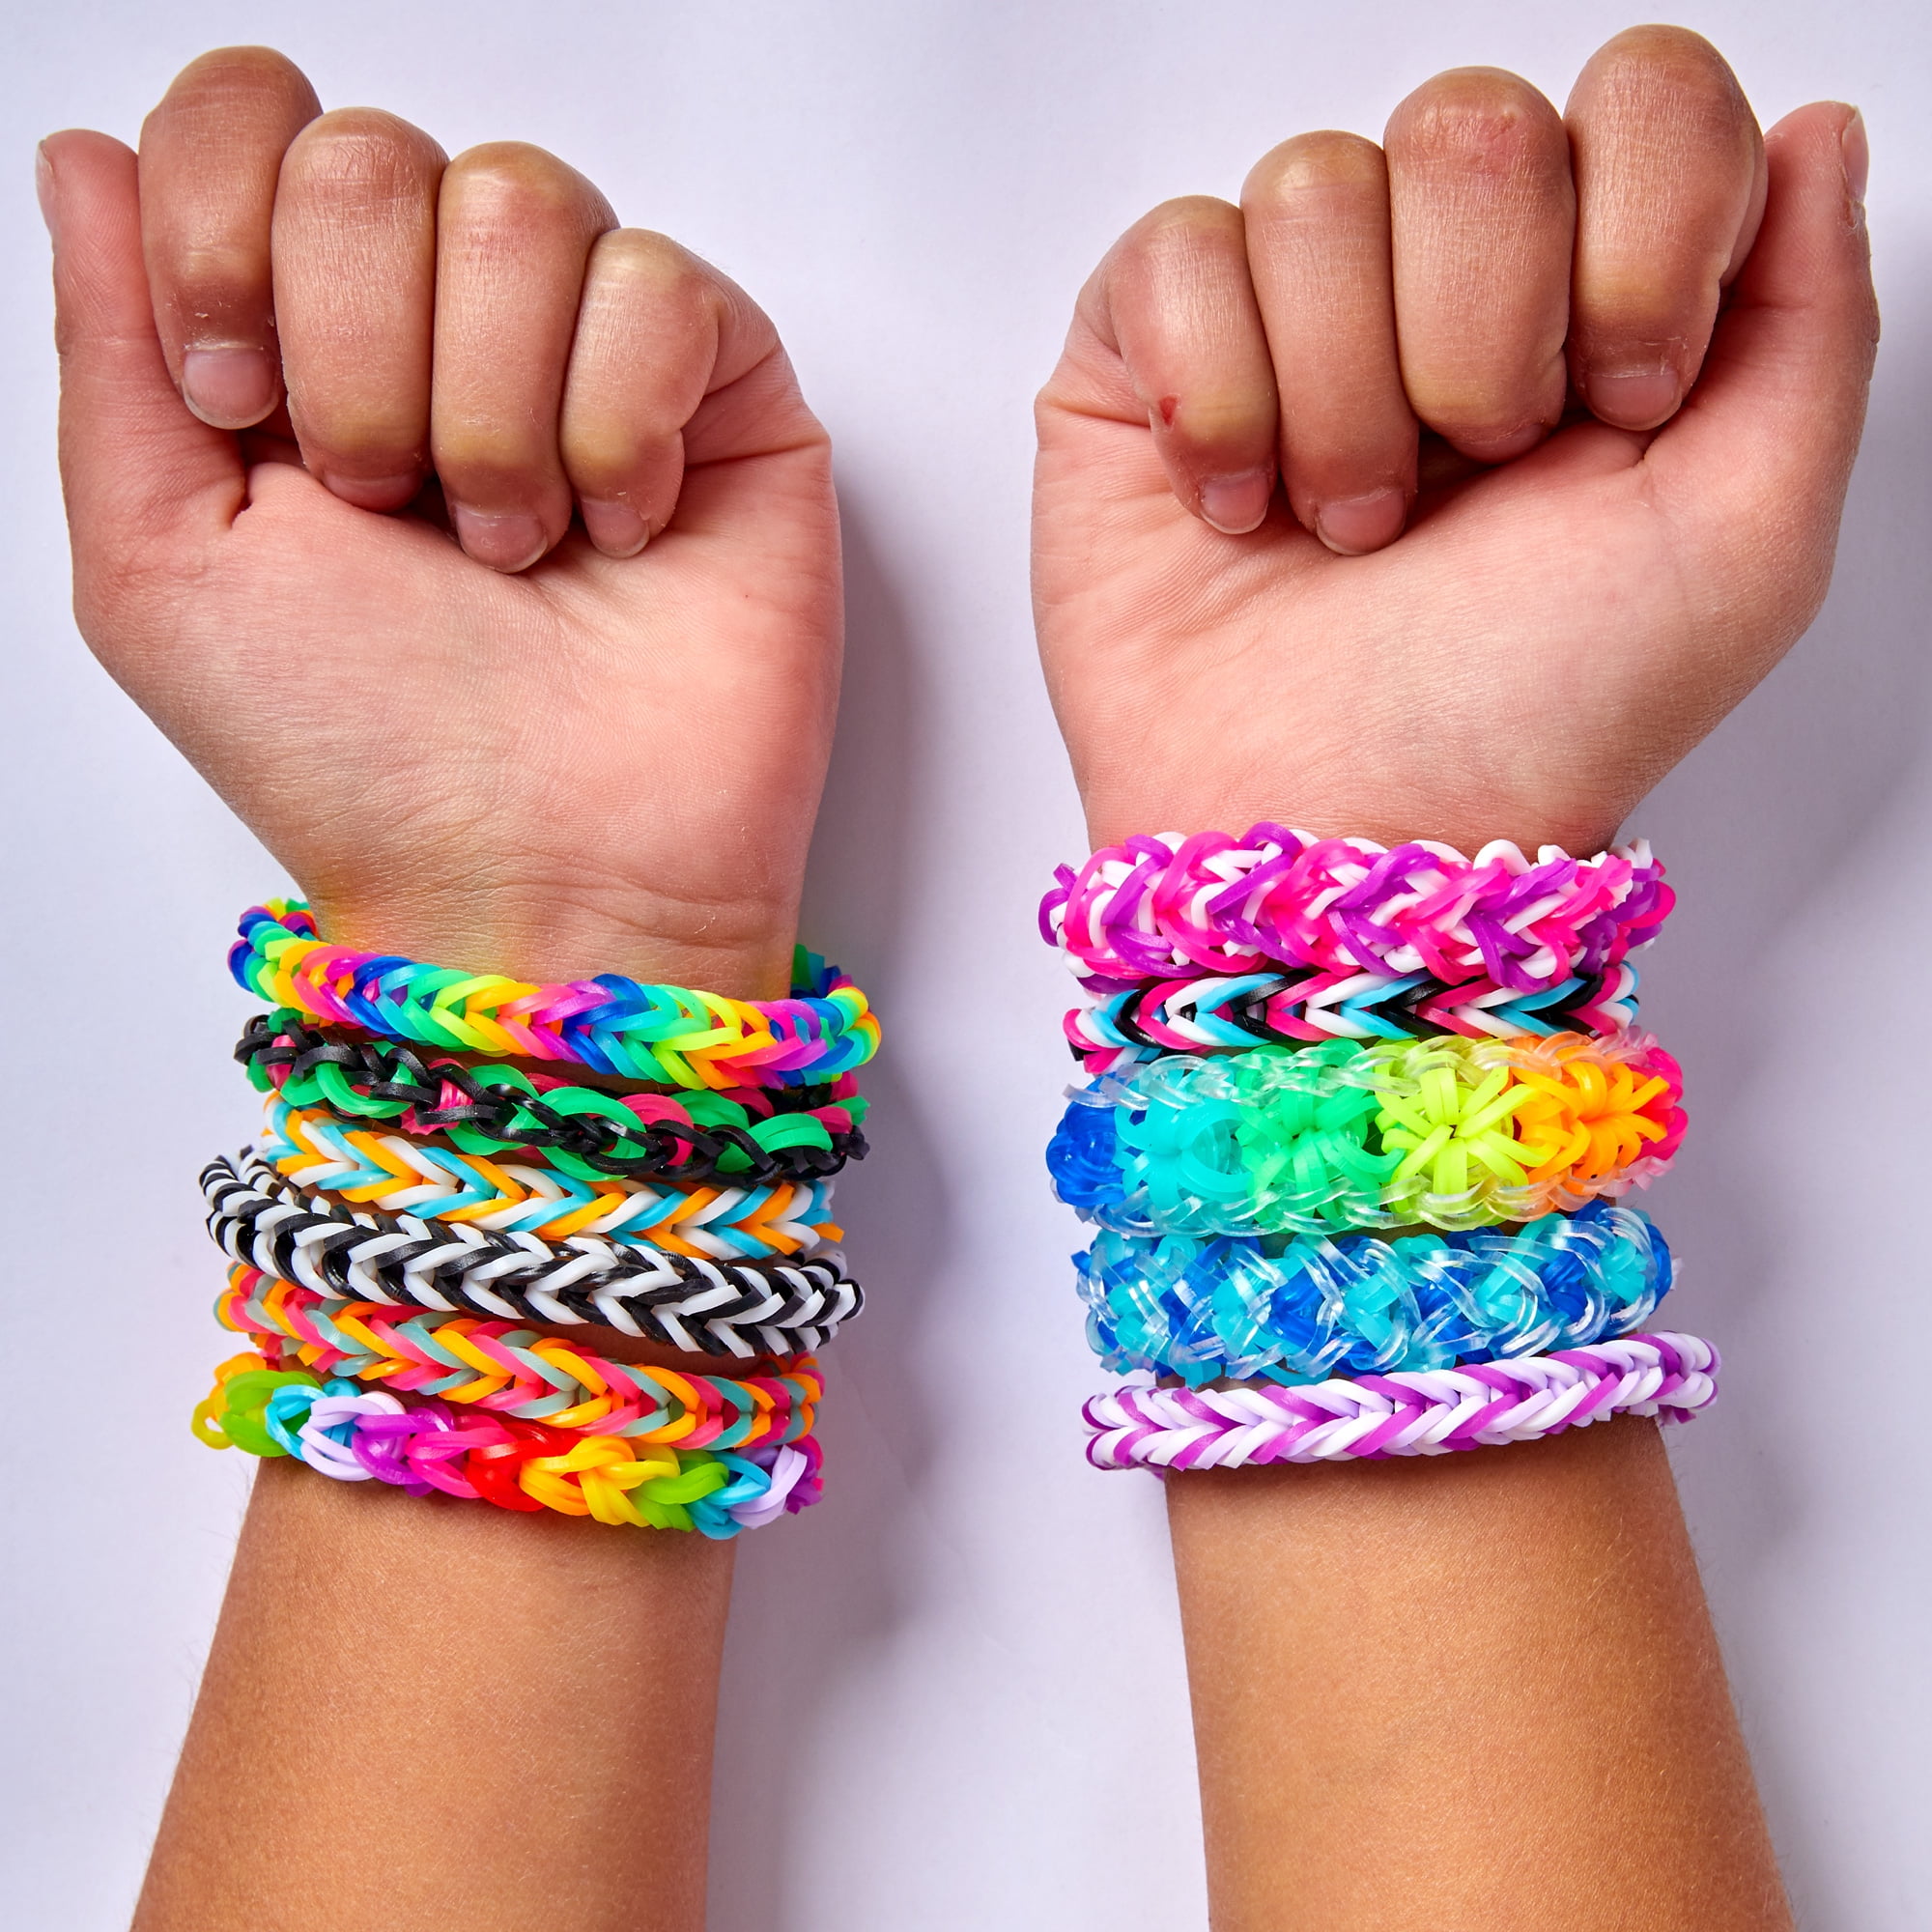 Loom Band Bracelet Technique with Spool Knitting